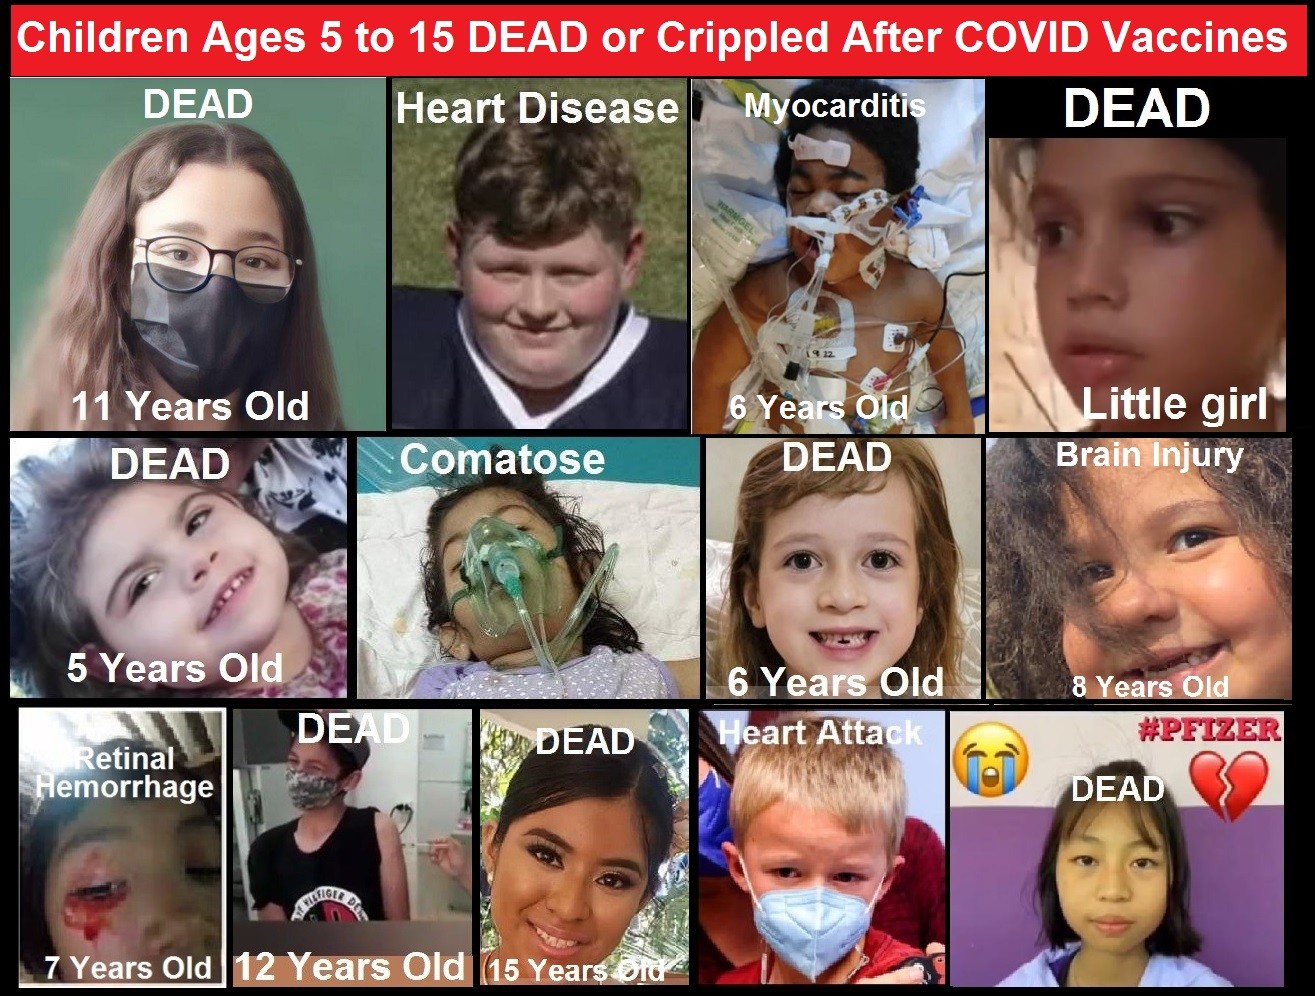 VAERS Data for Children Aged 5 to 15 Injected with COVID-19 Shots Children-5-to-11-year-old-covid-vaccine-deaths